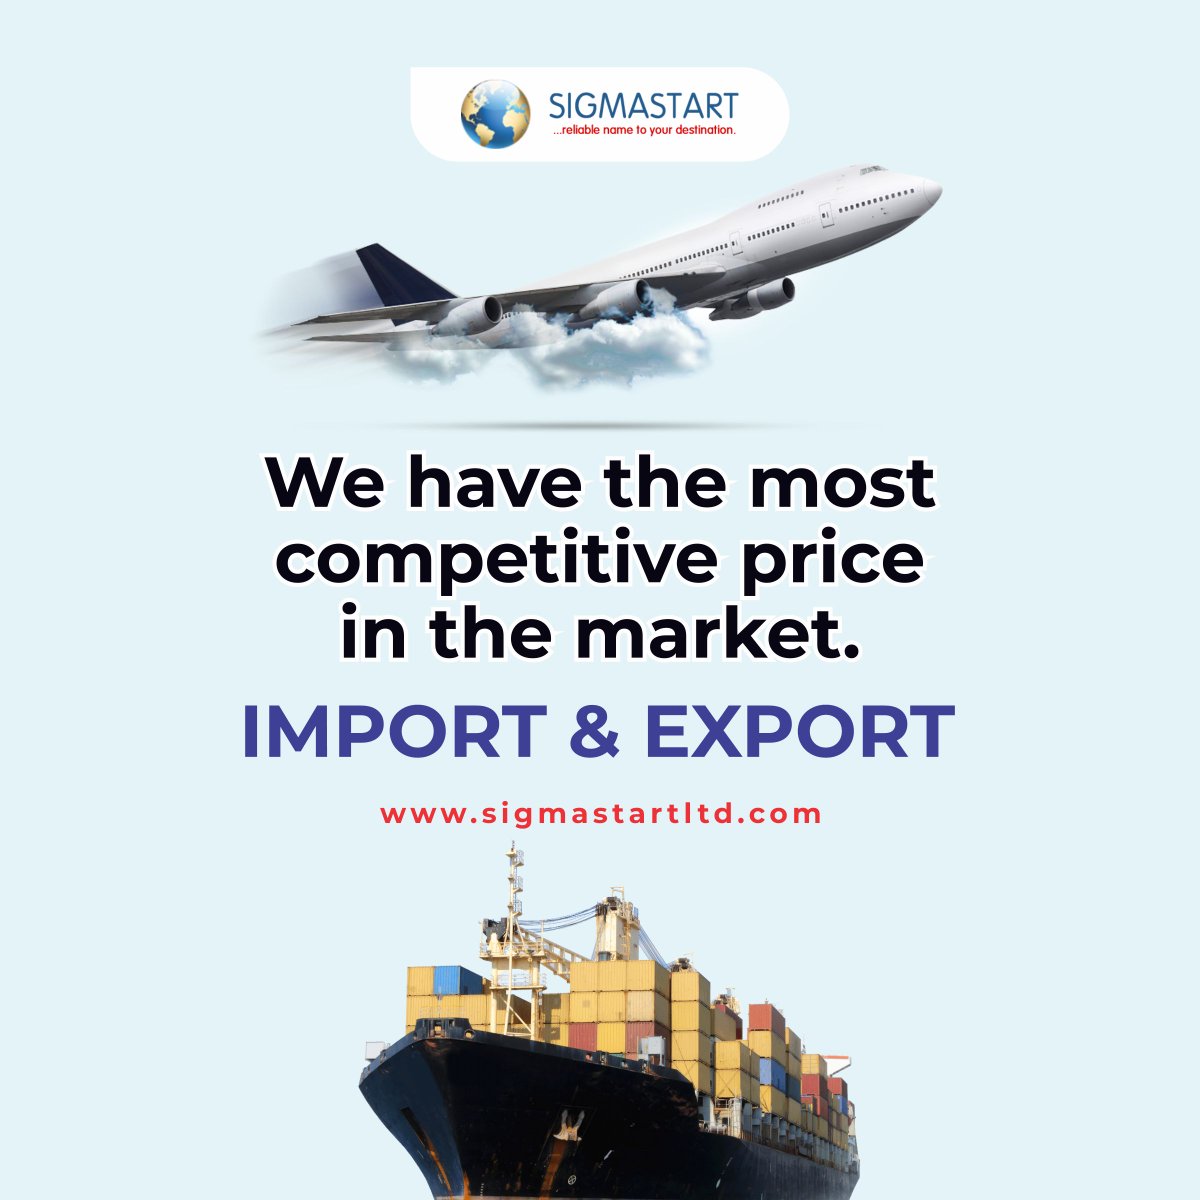 We have the most competitive price in the market. Import and Export to and from the UK/Europe to Nigeria

#doorstepdelivery #corporateclient #nigeriansindiaspora #london #cargotonaija #uk2naija #uk #southlondon #nigeriansindiaspora #china #france #germany #india #sea #shipping